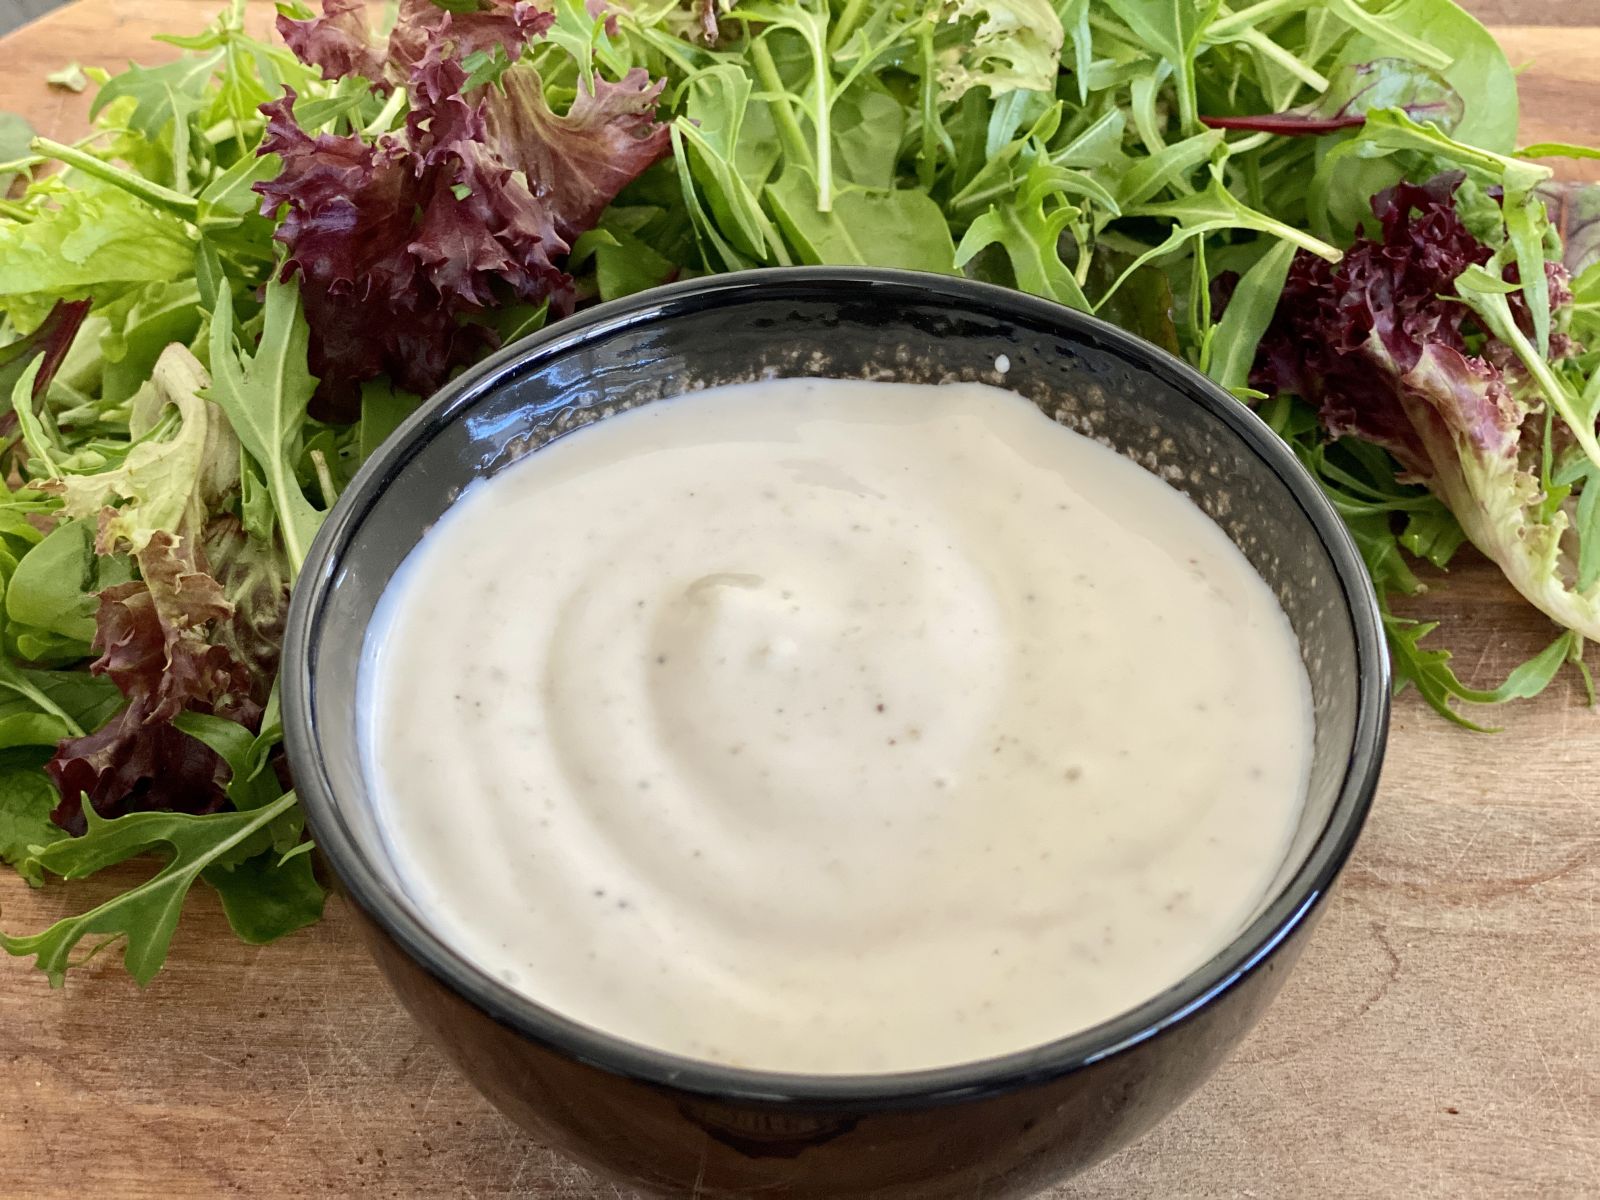 A yoghurt dipping sauce on a board with mixed lettuce leaves.